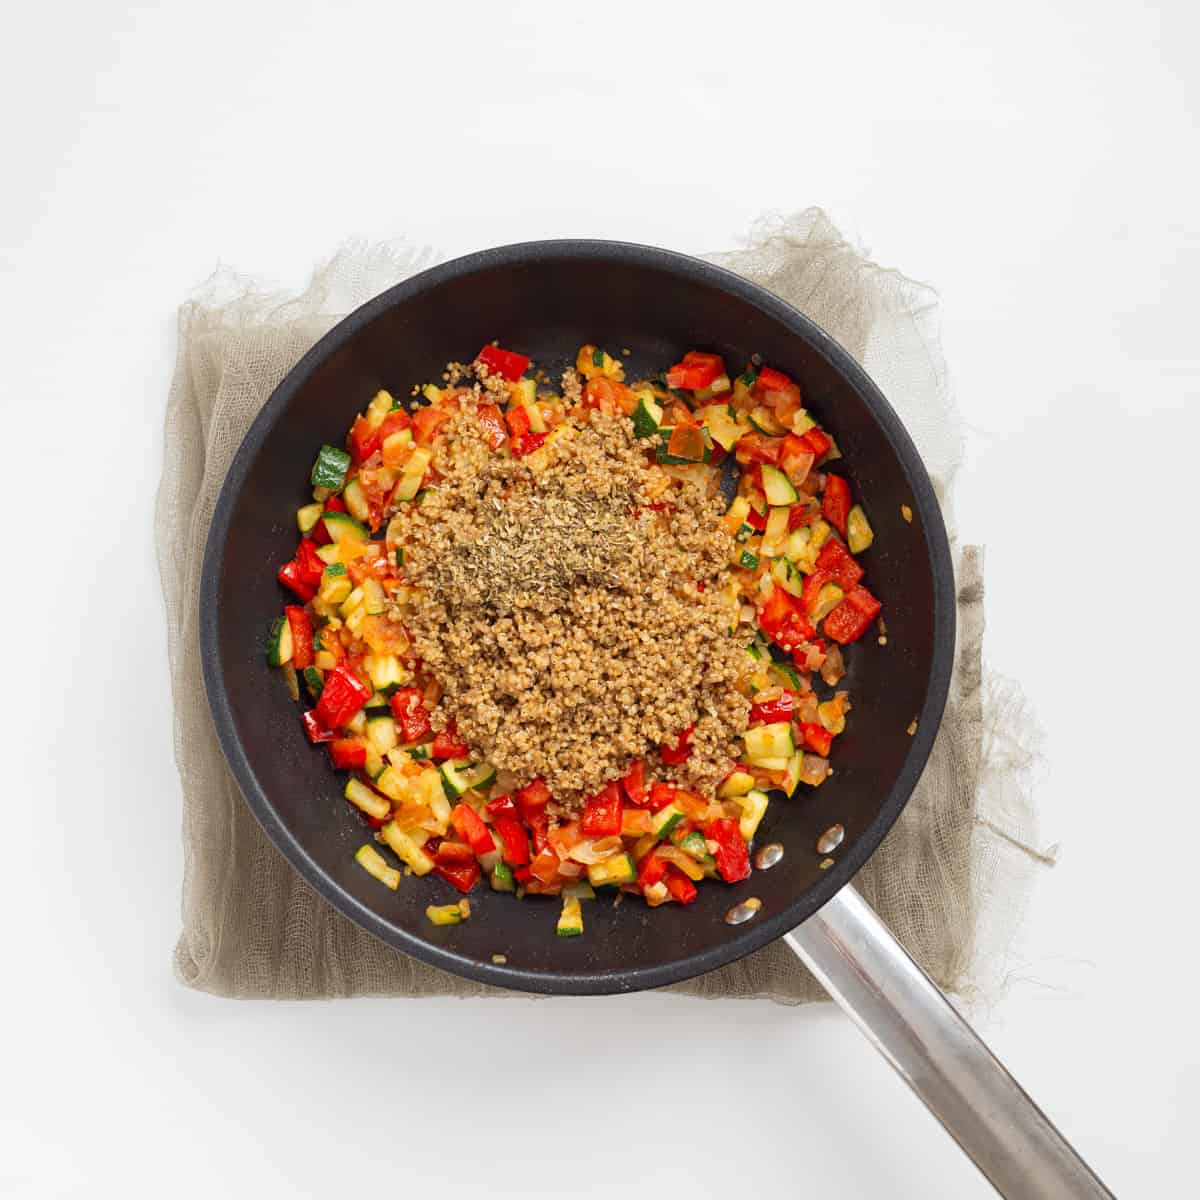 An overhead image of quinoa and dried italian seasoning being added to a skillet full of sauteed vegetables.